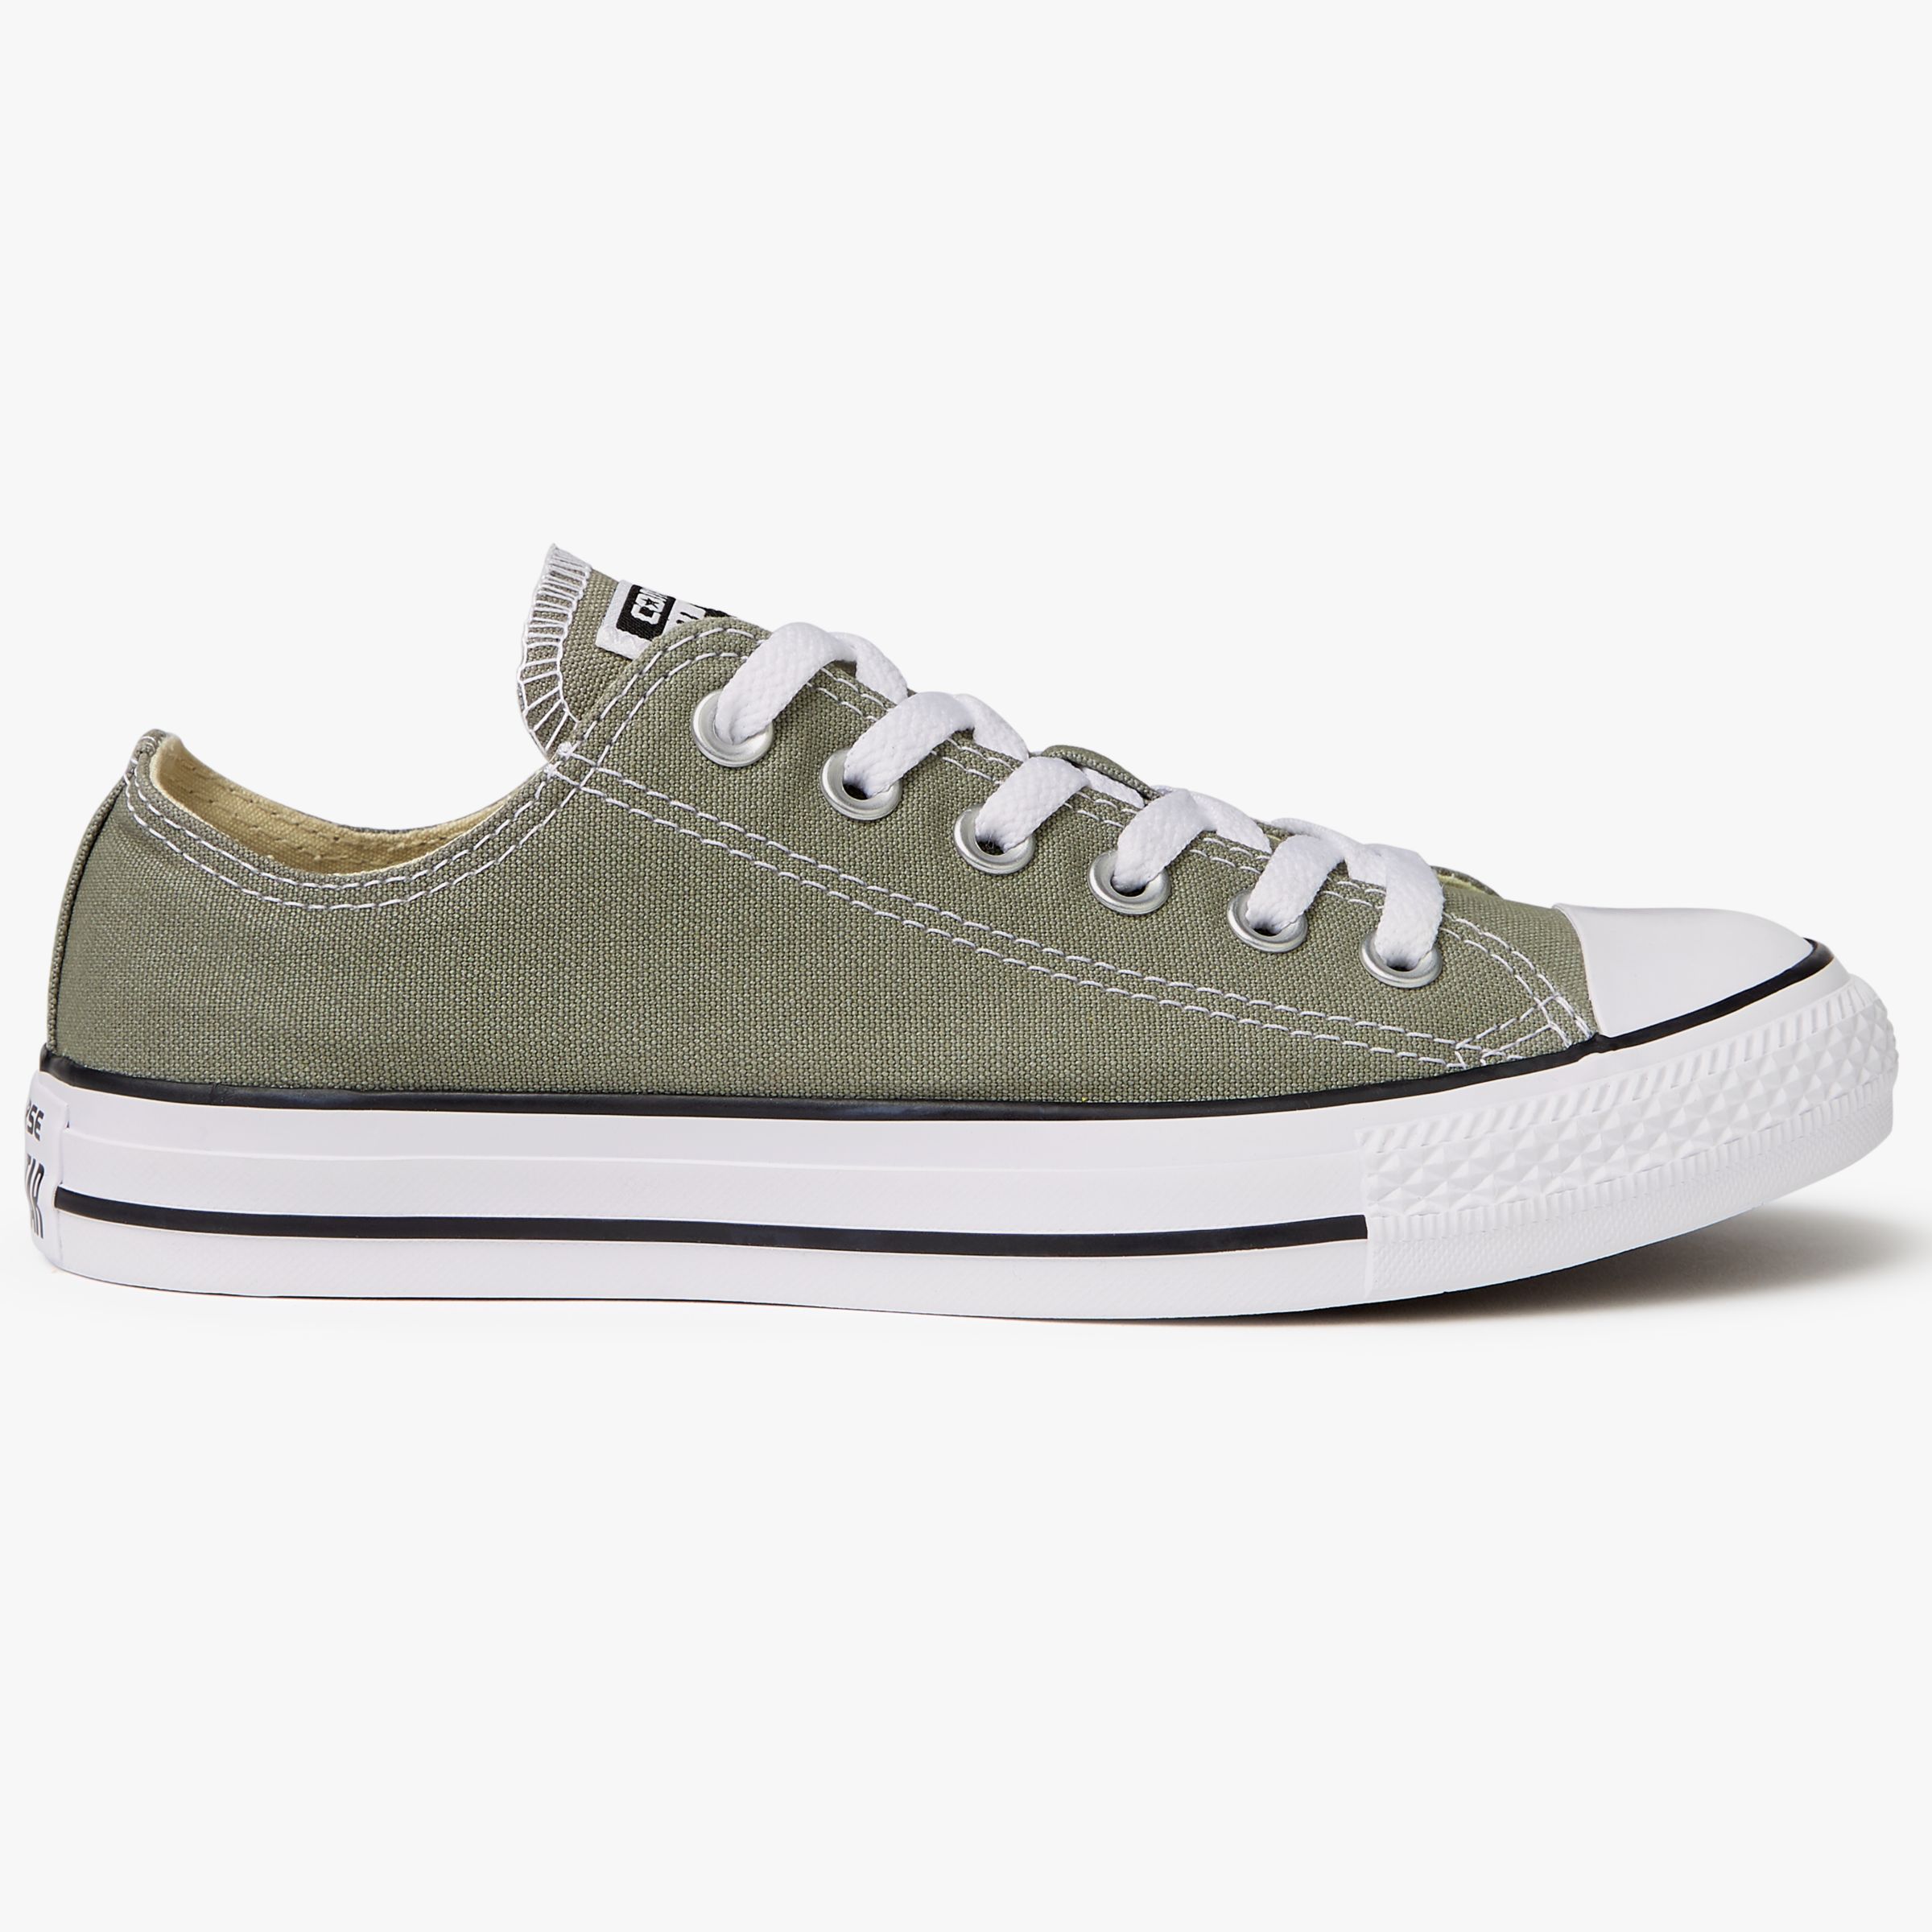 Converse Chuck Taylor All Star Women's Canvas Ox Low-Top Trainers